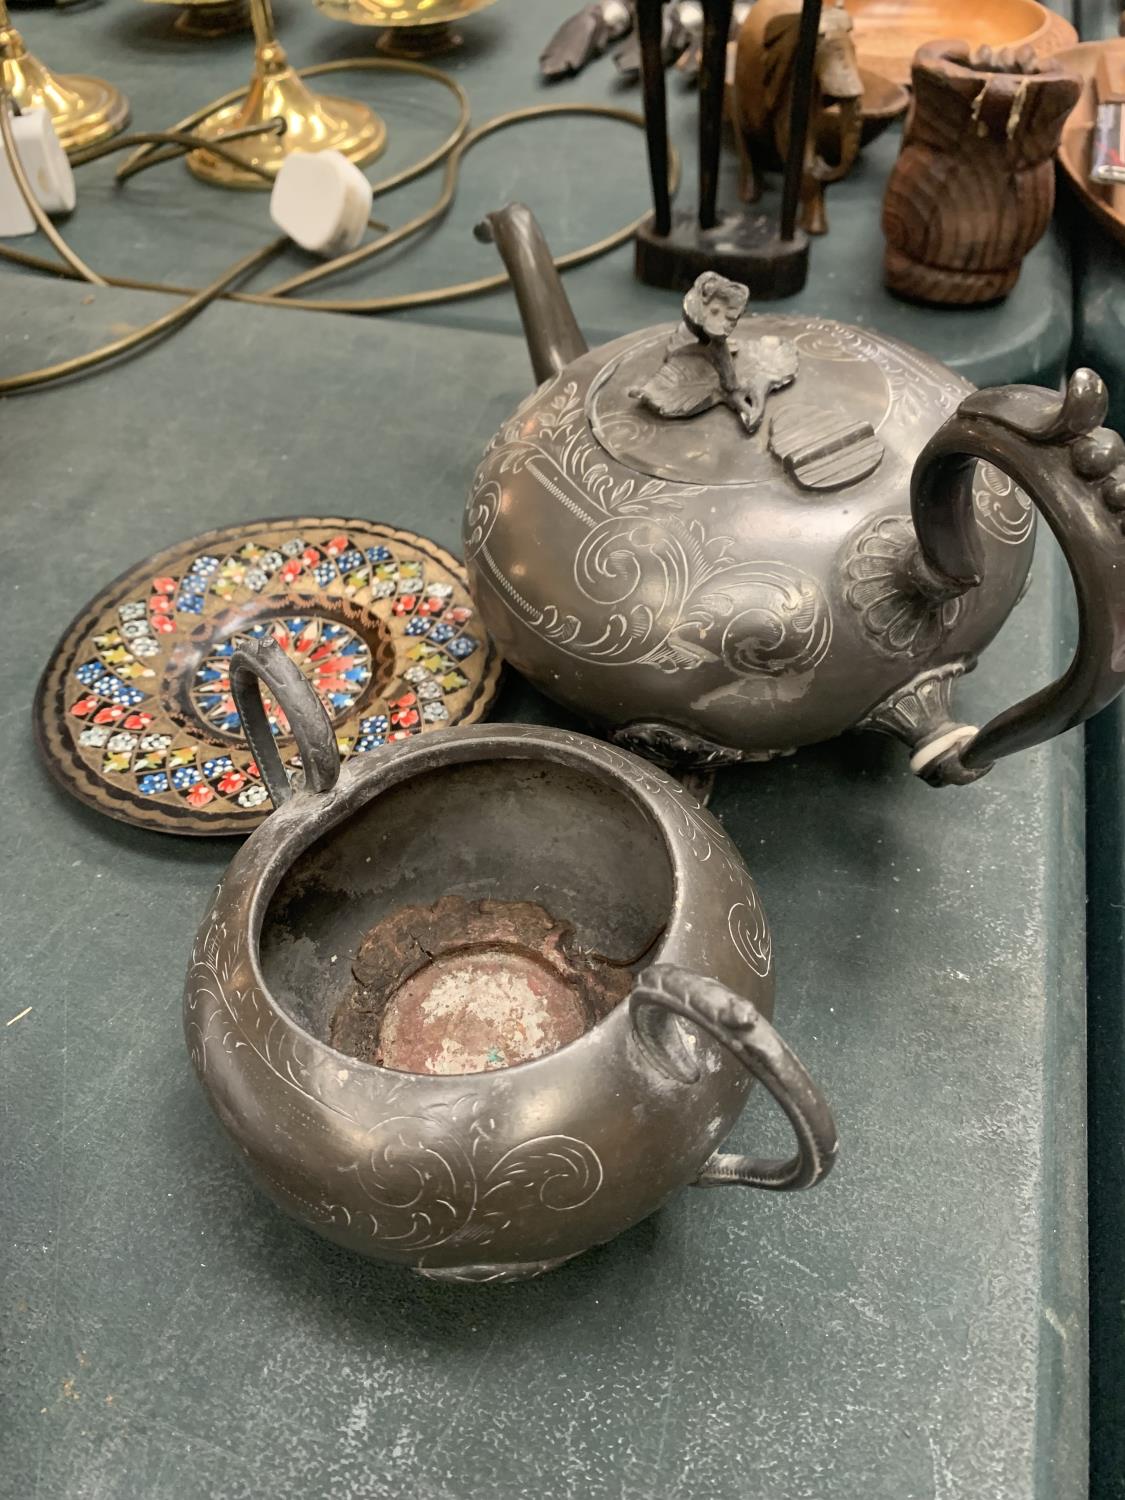 THREE ITEMS TO INCLUDE A DECORATIVE PEWTER TEAPOT AND SUGAR BOWL - Image 2 of 2